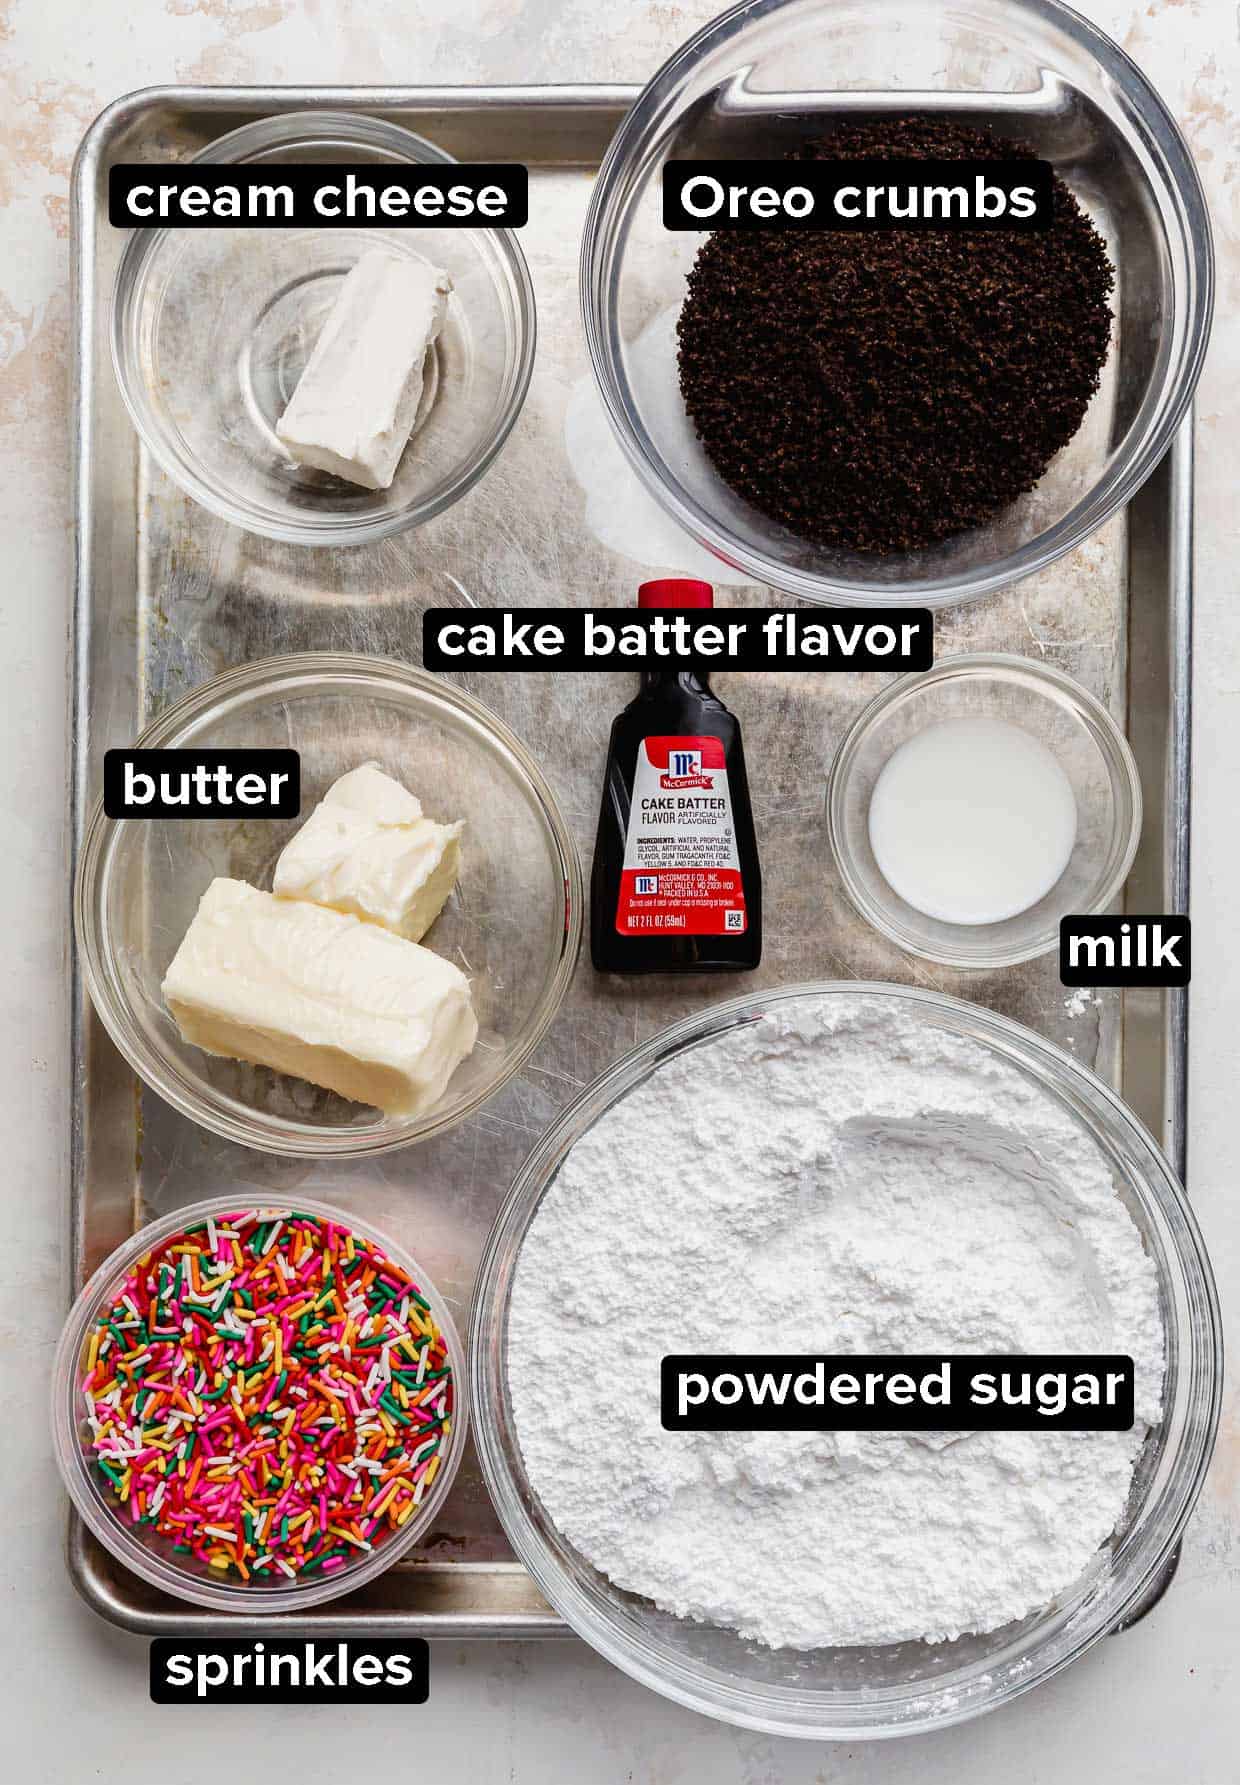 Ingredients used to top the Crumbl Oreo Birthday Cake Cookies: sprinkles, powdered sugar, butter, milk, cake batter extract, oreo crumbs, and cream cheese.